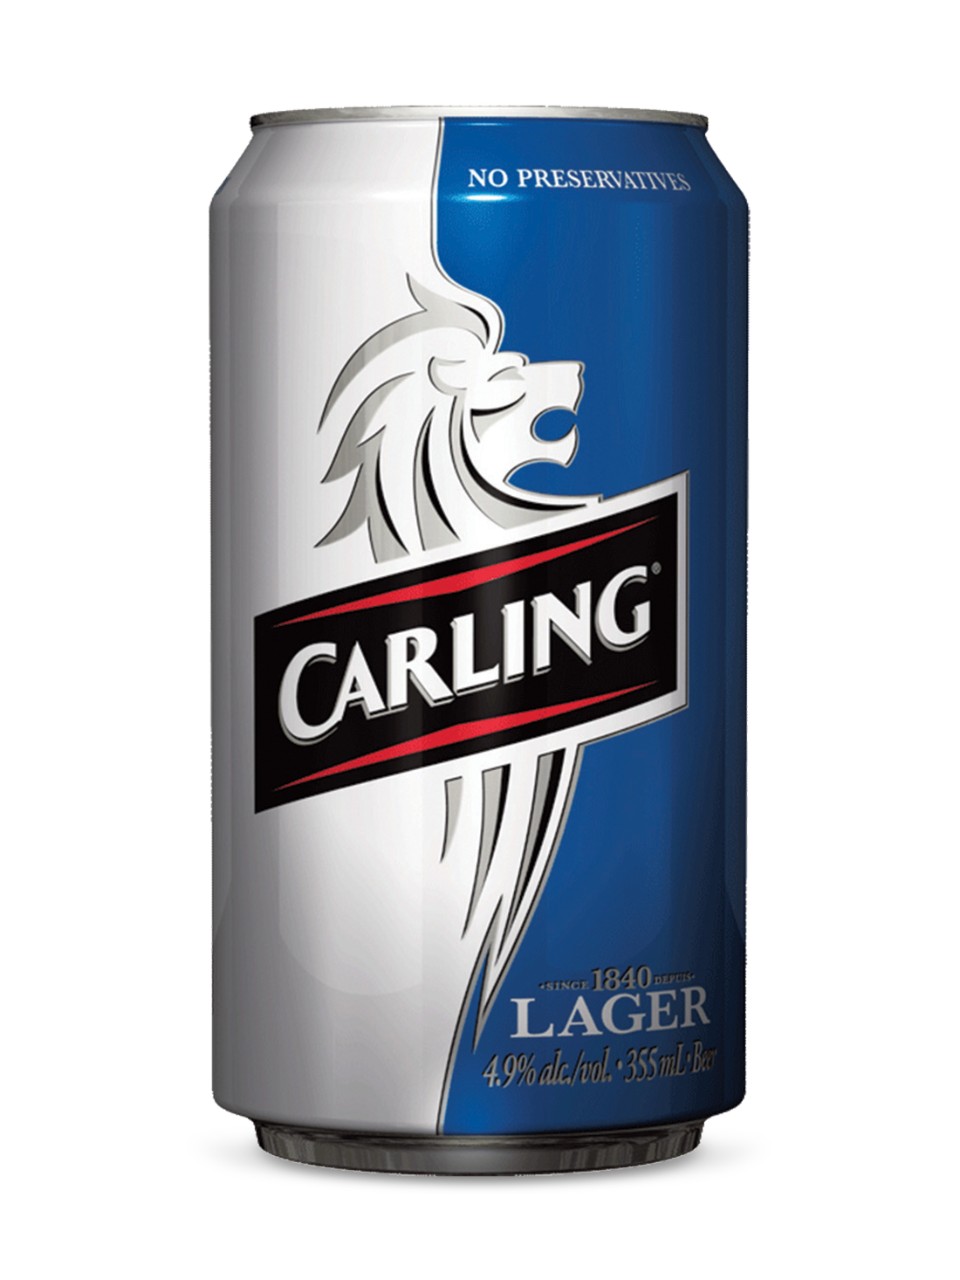 Carling Lager | LCBO